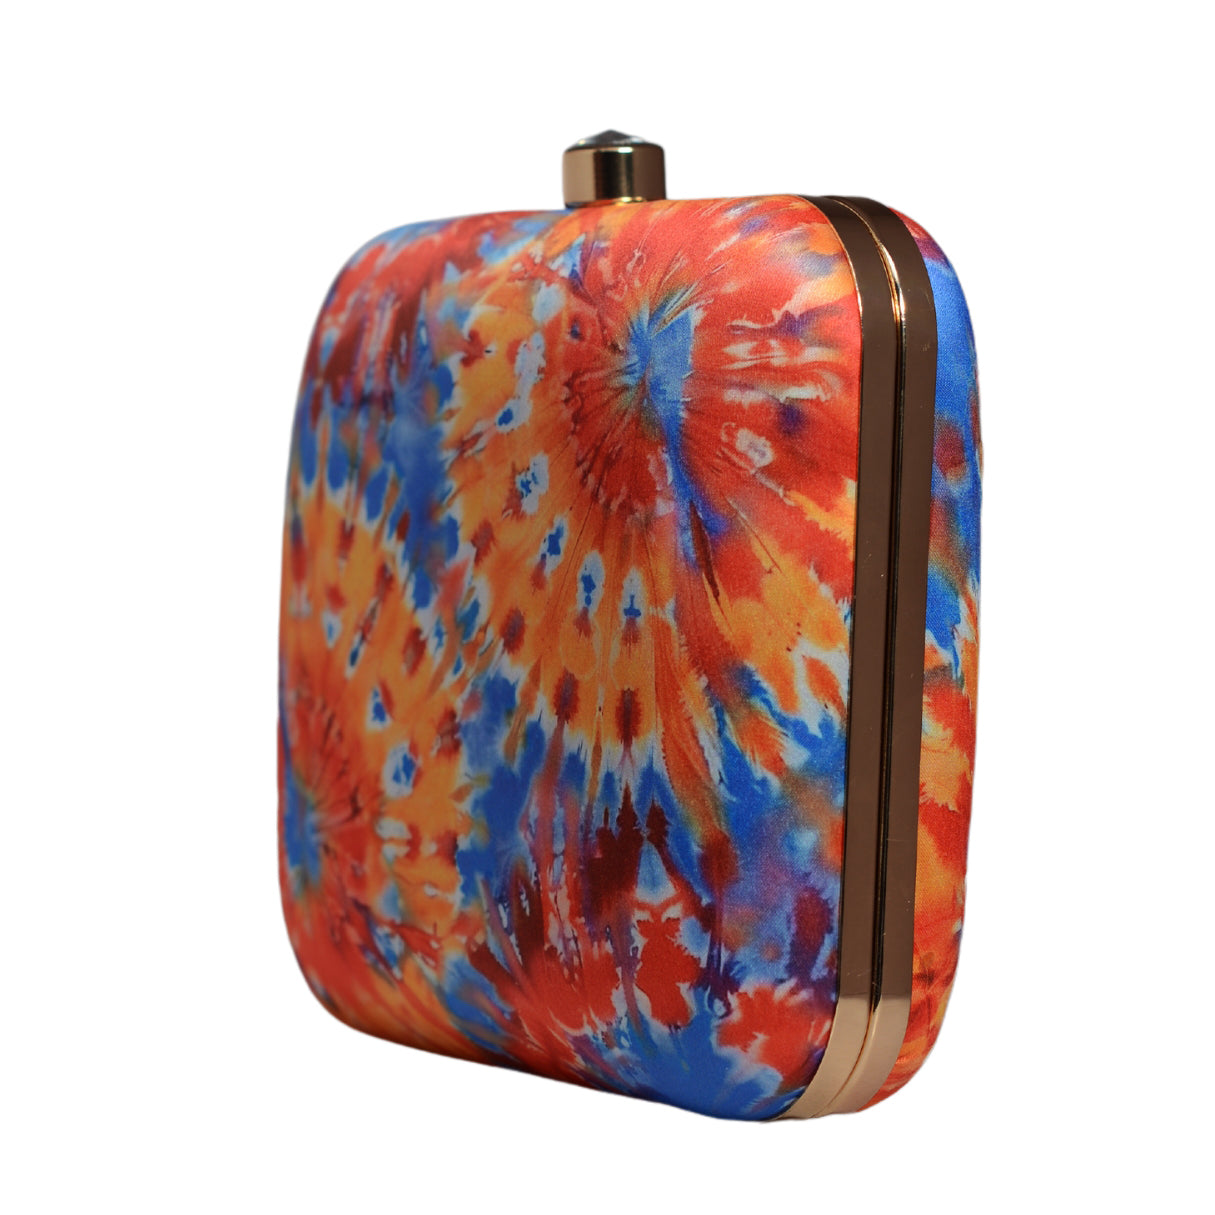 Orange And Blue Tie And Dye Printed Clutch